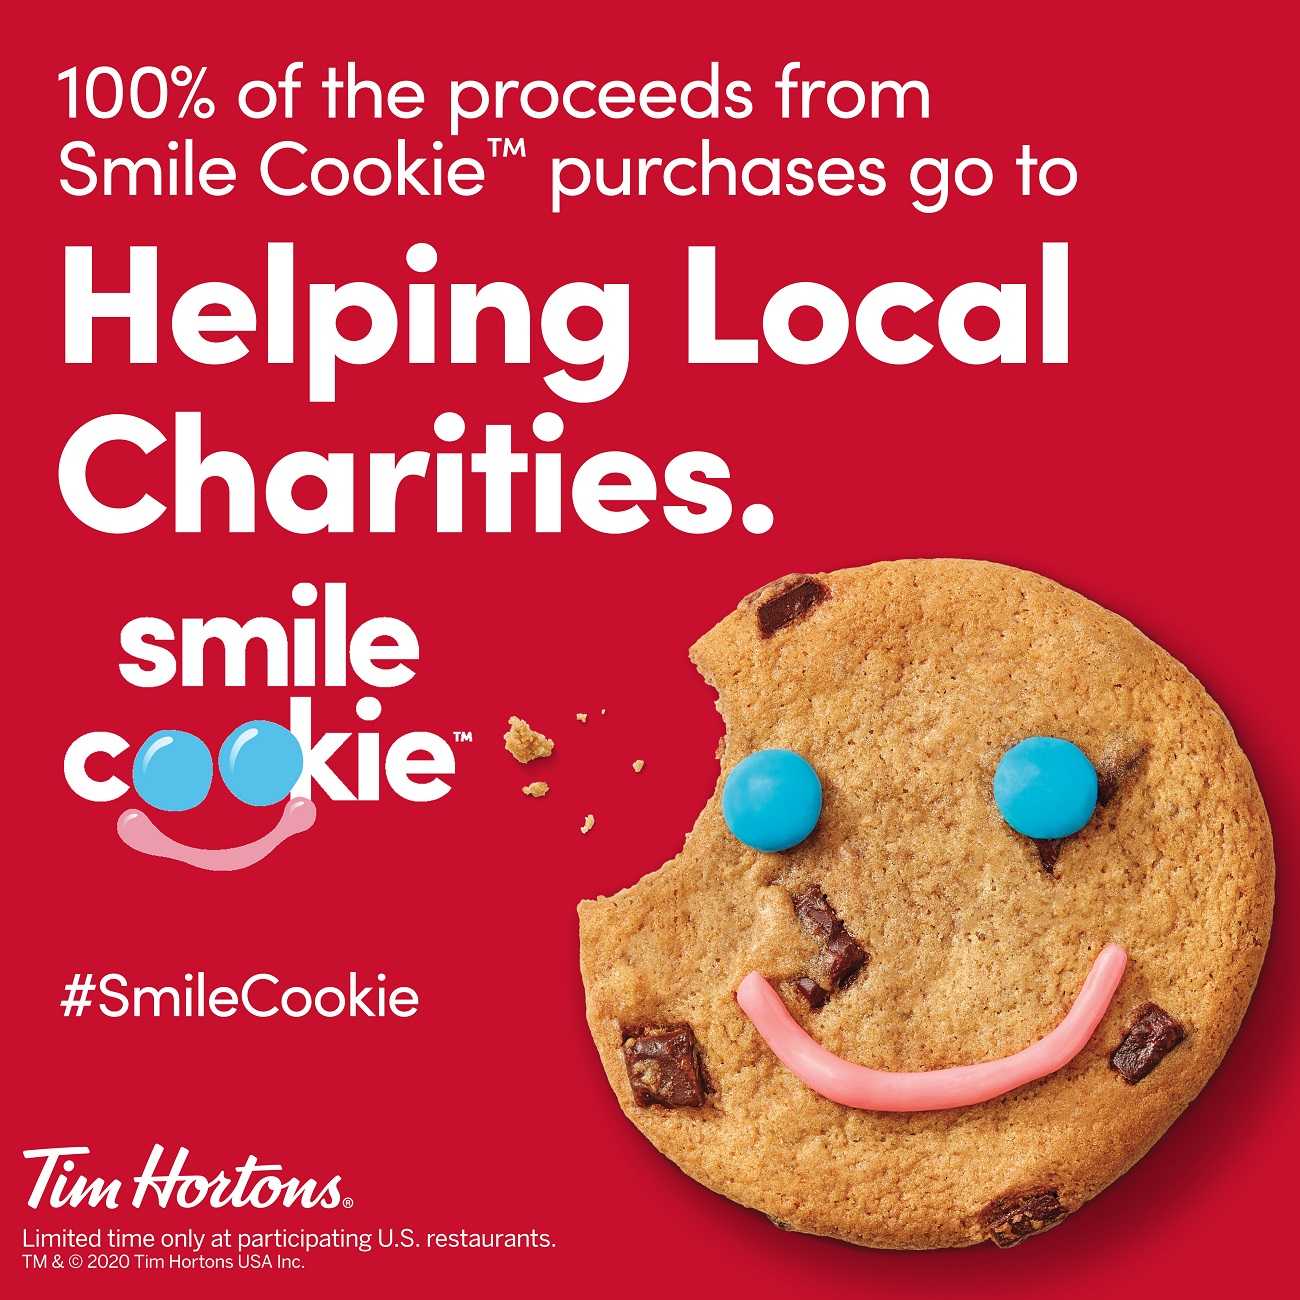 Tim Hortons Smile Cookie campaign